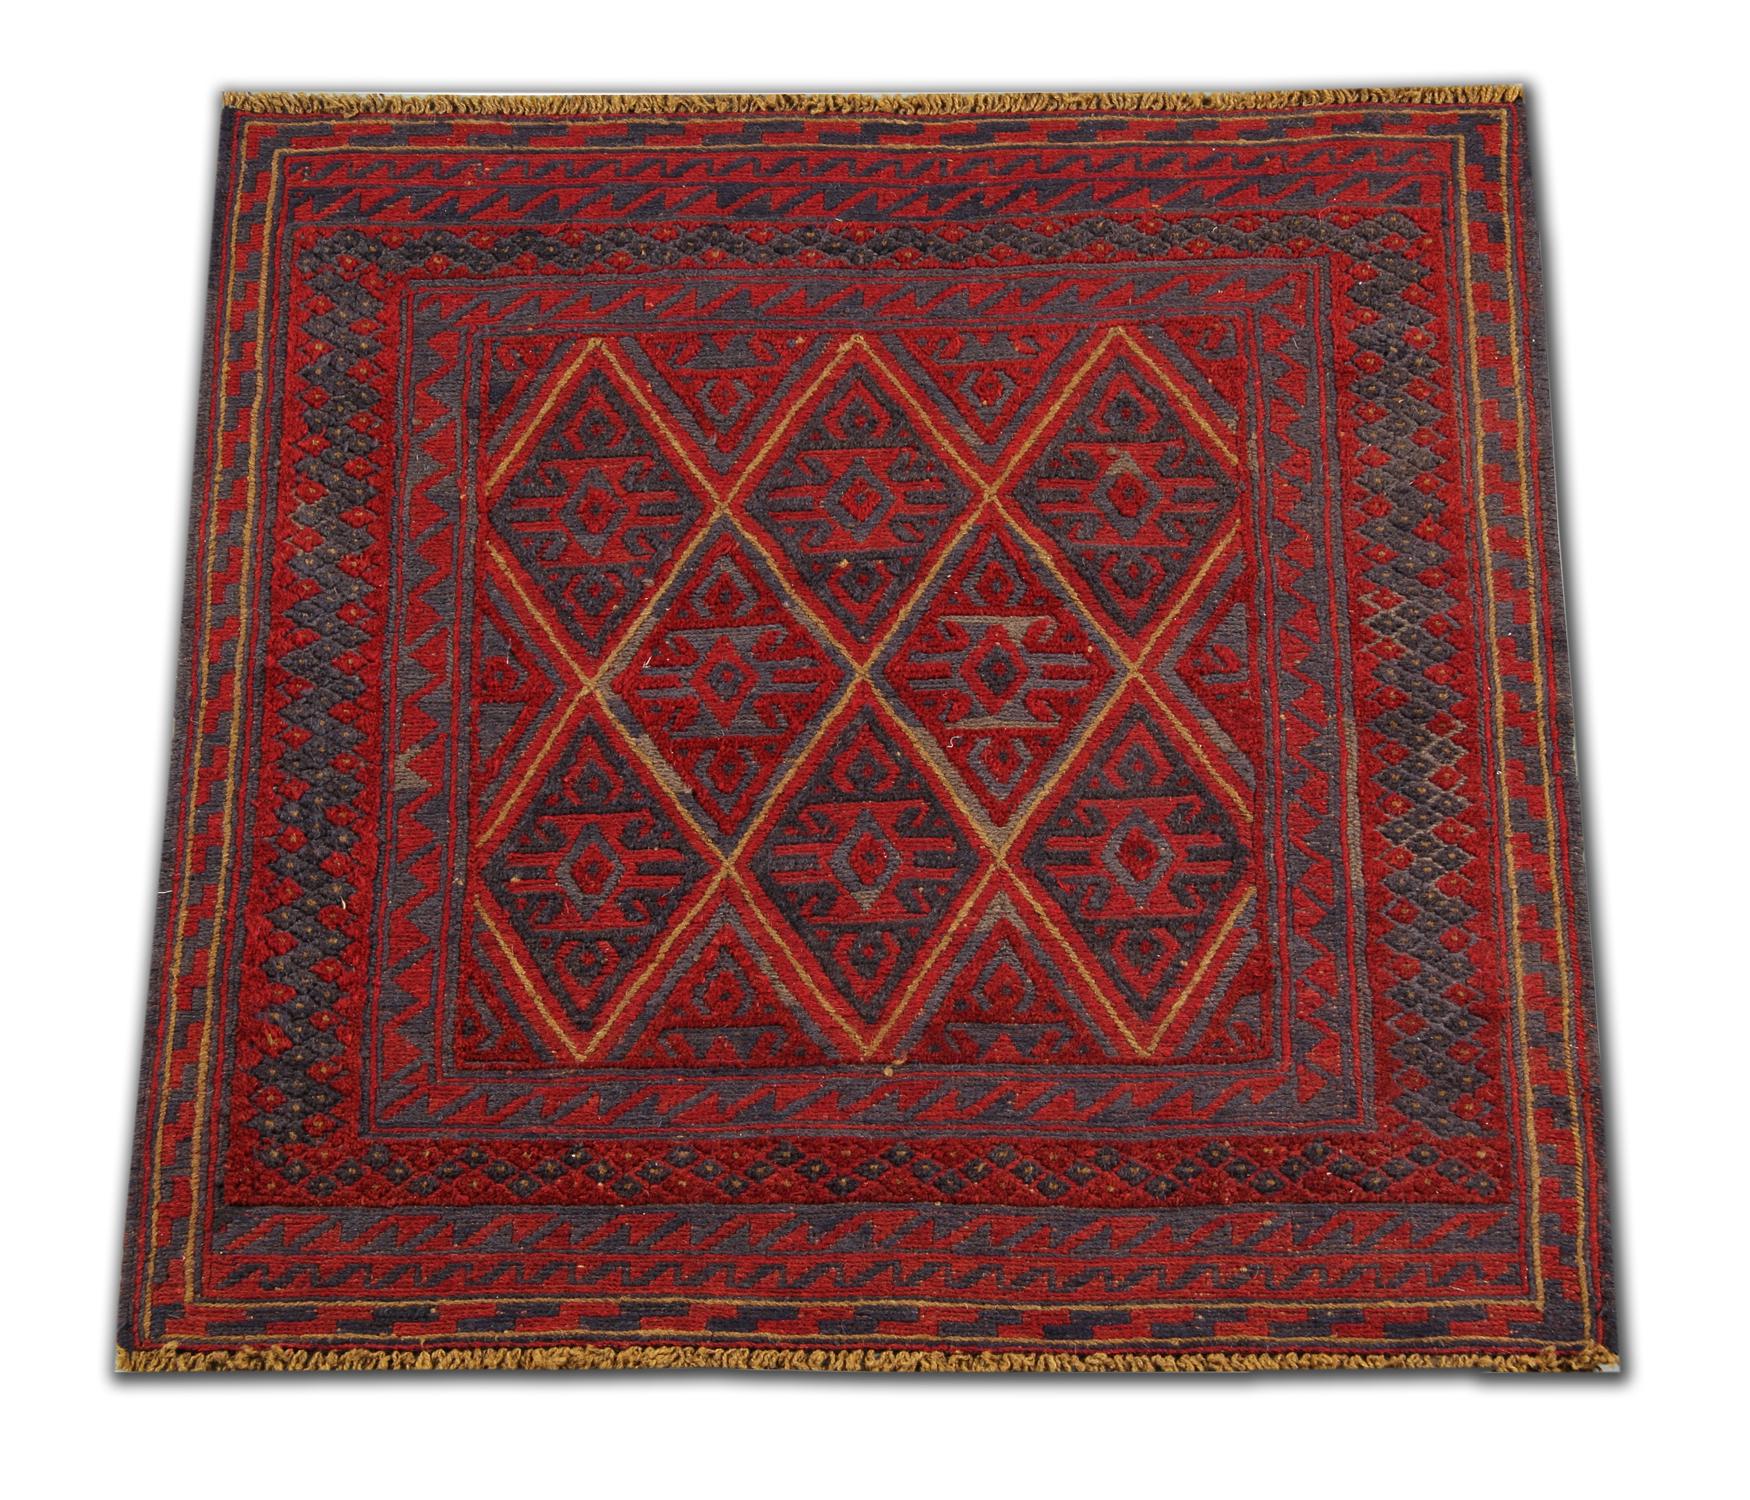 This handmade carpet is a fine example of Afghani rugs, made by highly skilled Turkmen oriental rug weavers in the north of Afghanistan. They have been constructed using hand-spun wool and 100% organic dying techniques that have been used for